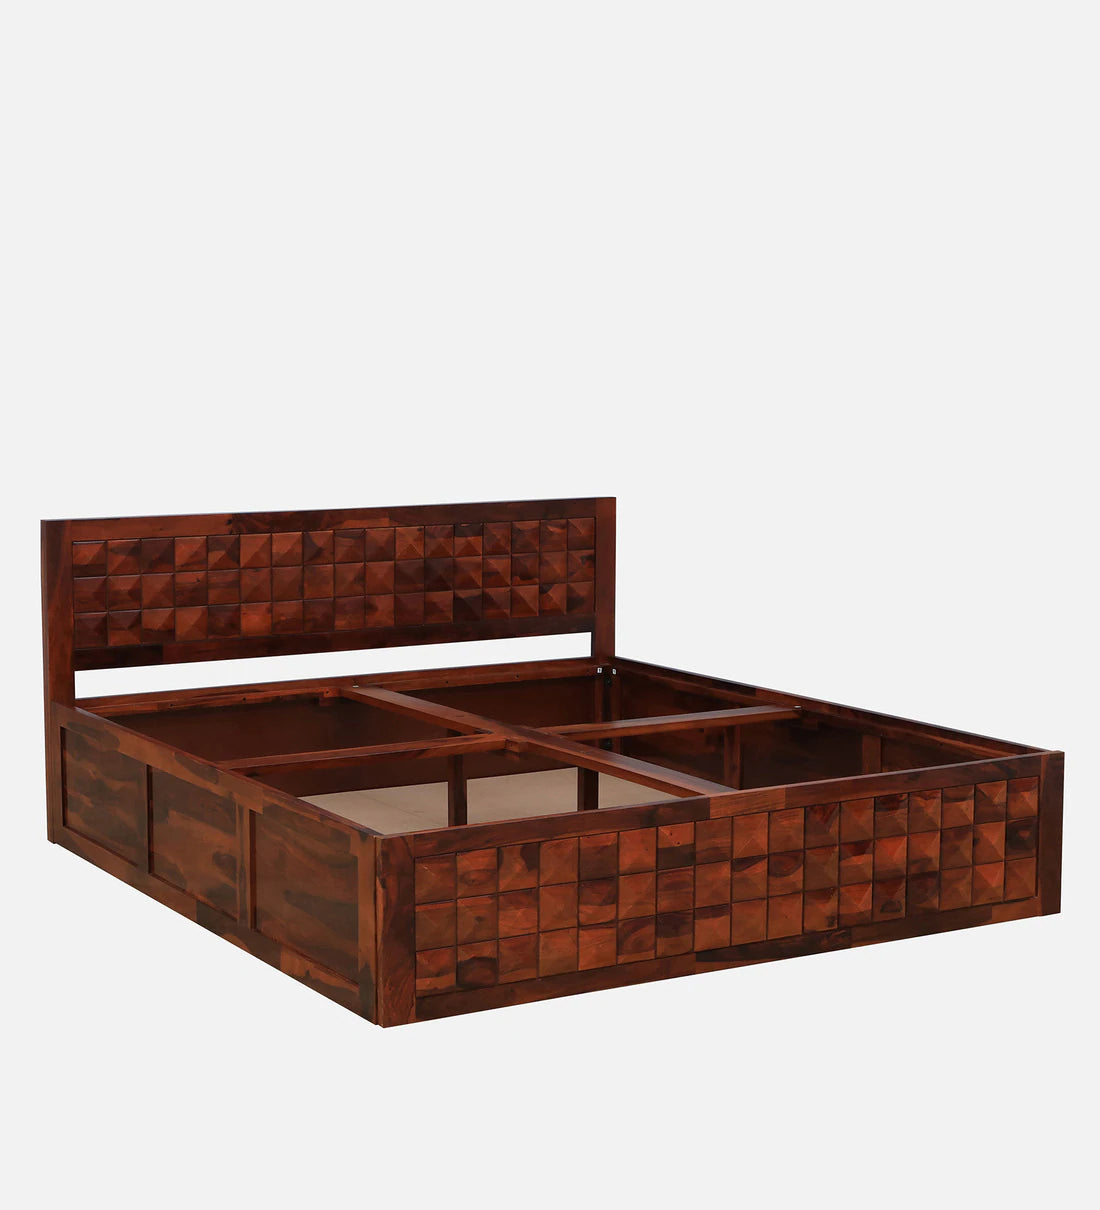 Sheesham Wood King Size Bed in Dark Brown Colour with Box Storage